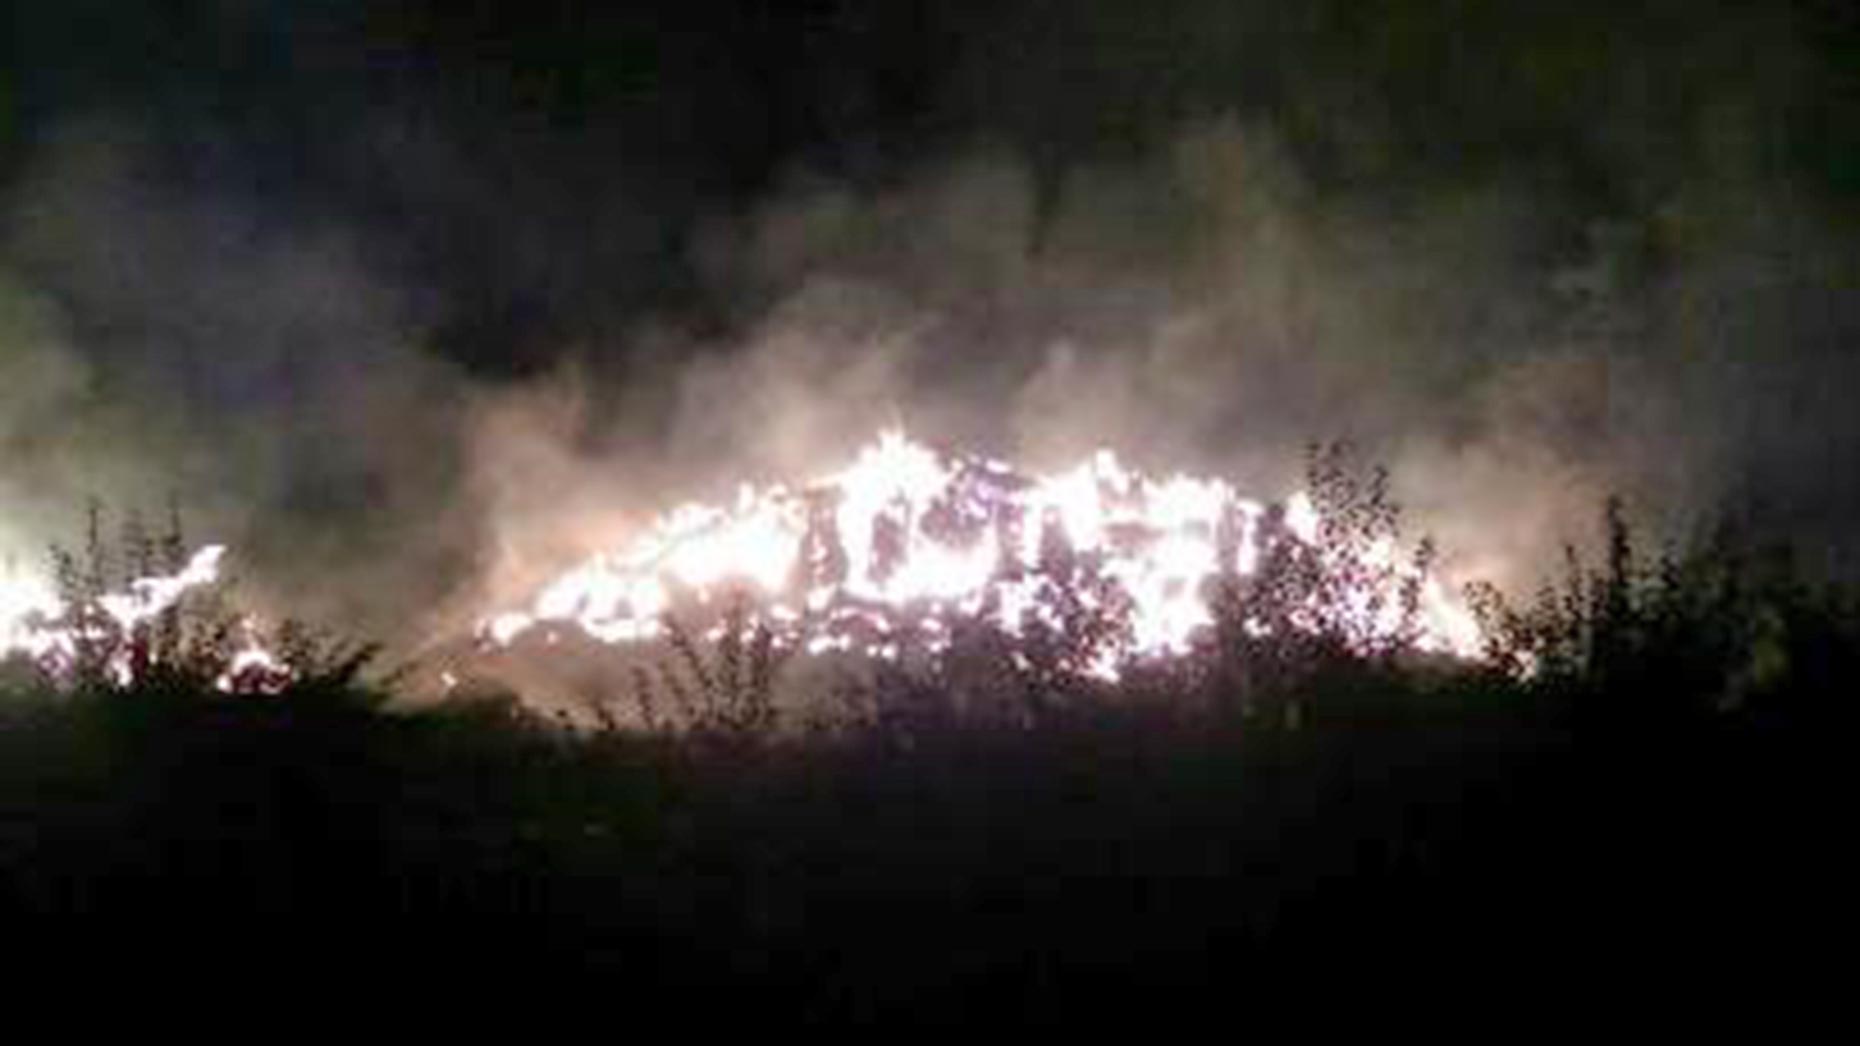 The fire off B1241 between Stow and Willingham by Stow. Photo: @LincsRPU